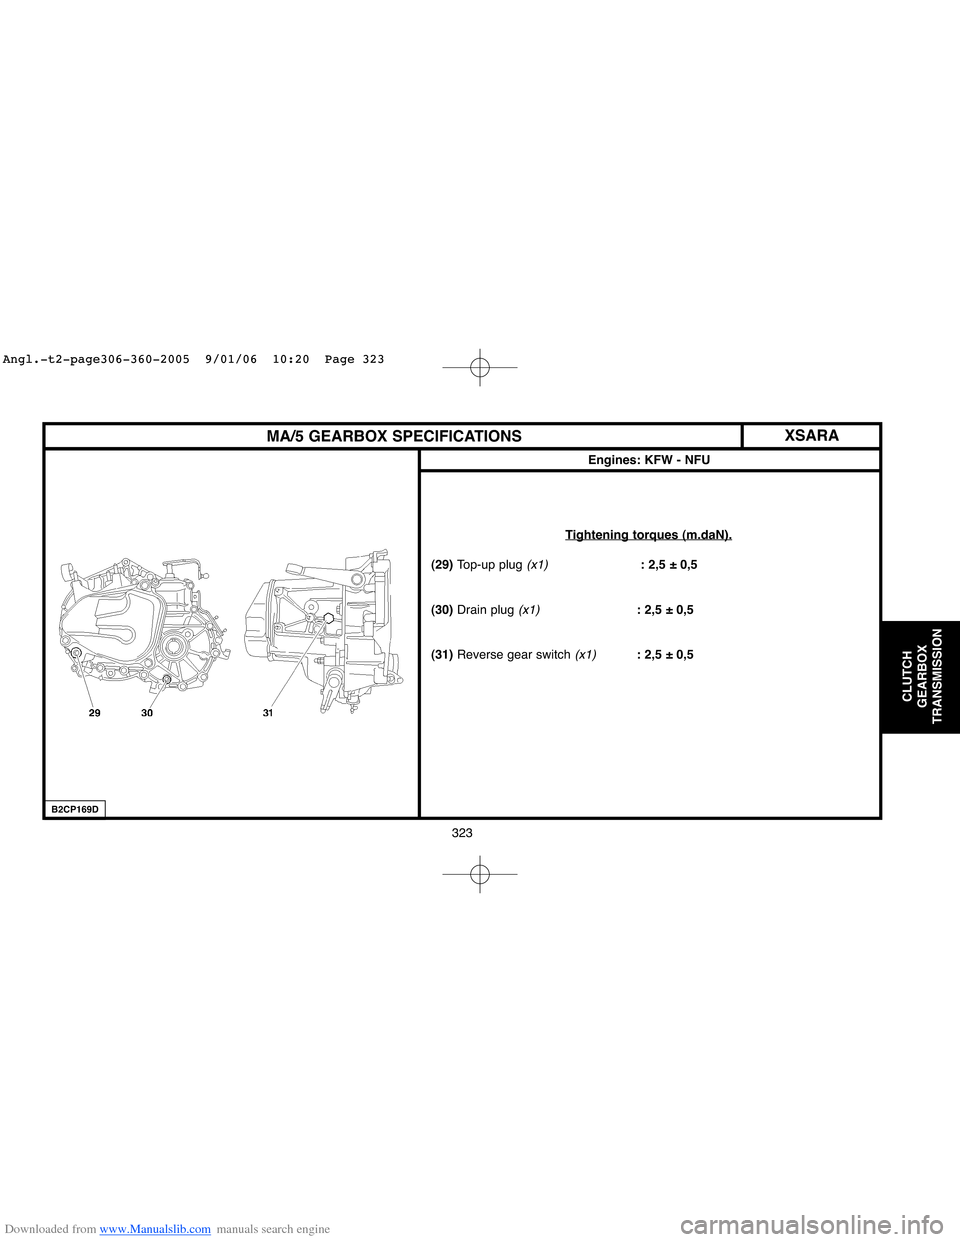 Citroen XSARA PICASSO 2005 1.G Service Manual Downloaded from www.Manualslib.com manuals search engine 323
CLUTCH
GEARBOX
TRANSMISSION
MA/5 GEARBOX SPECIFICATIONS
Engines: KFW - NFU
Tightening torques (m.daN).
(29) Top-up plug (x1): 2,5 ± 0,5
(3